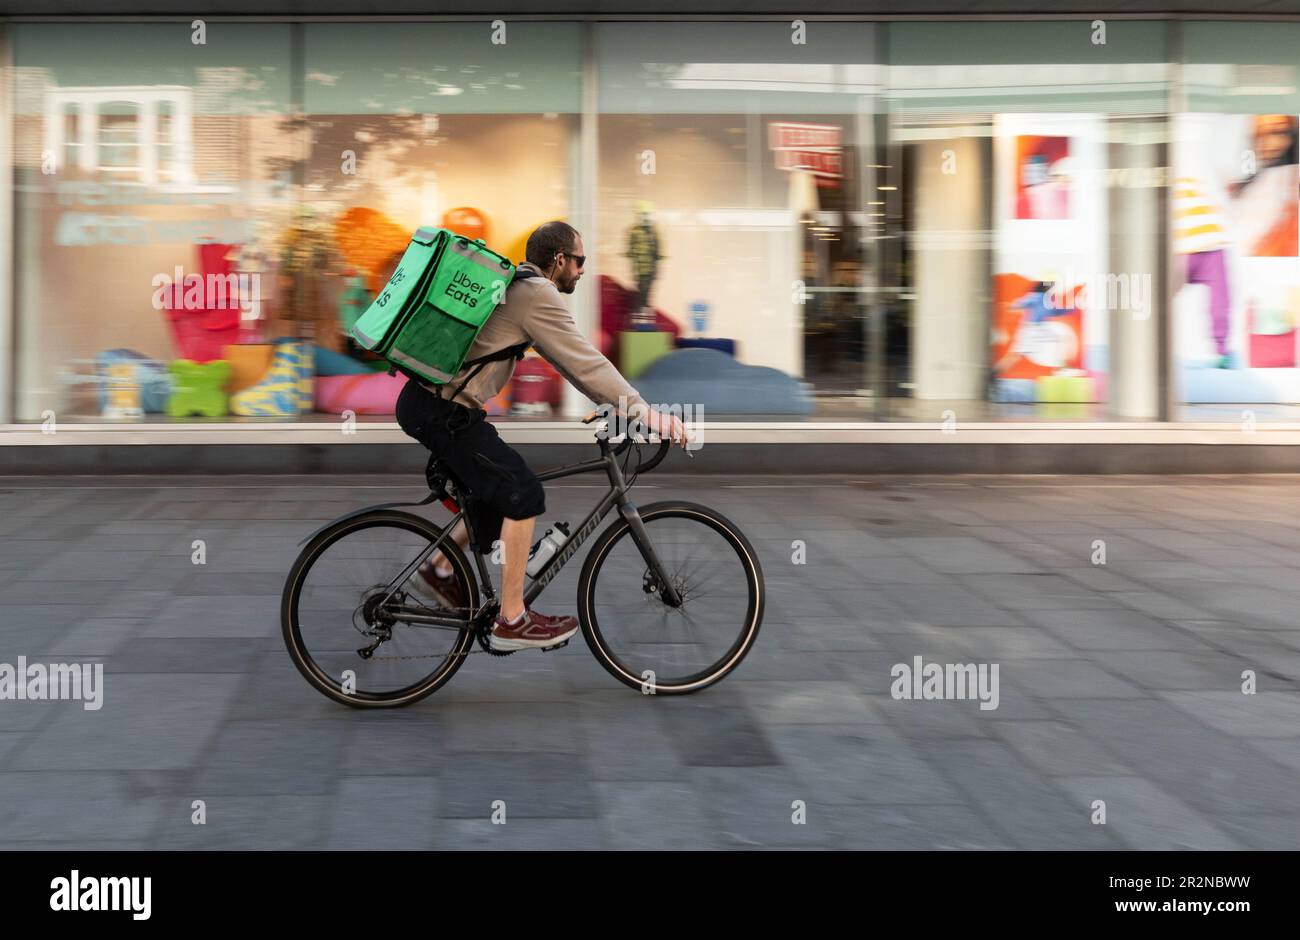 Uber Eats bike delivery man in Liverpool Stock Photo